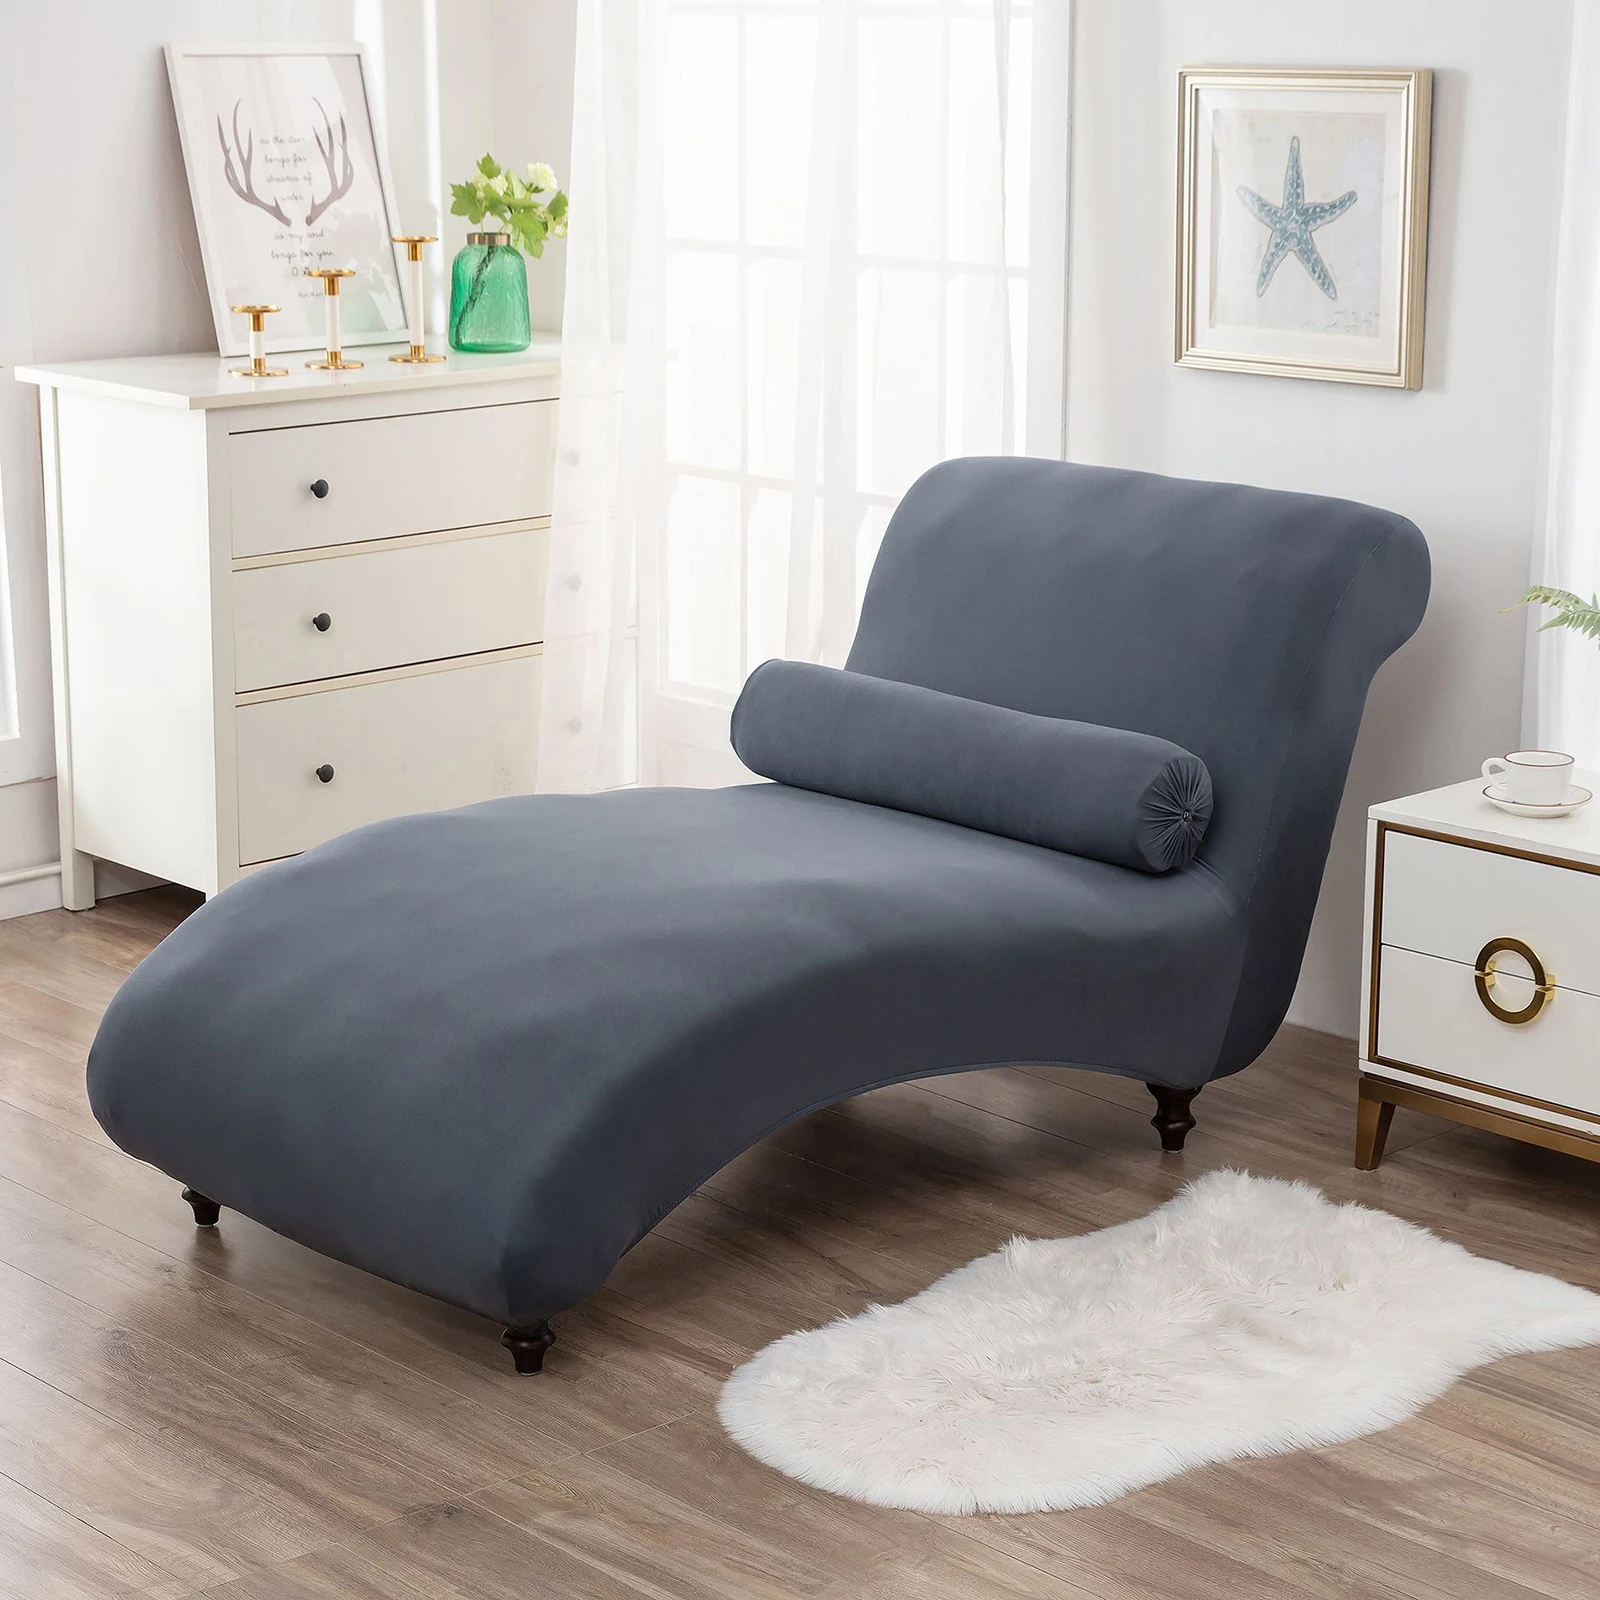 Armless Chaise Lounge Cover Living Room Stretch Chaise Slipcover for Bedroom Chaise Machine Washable